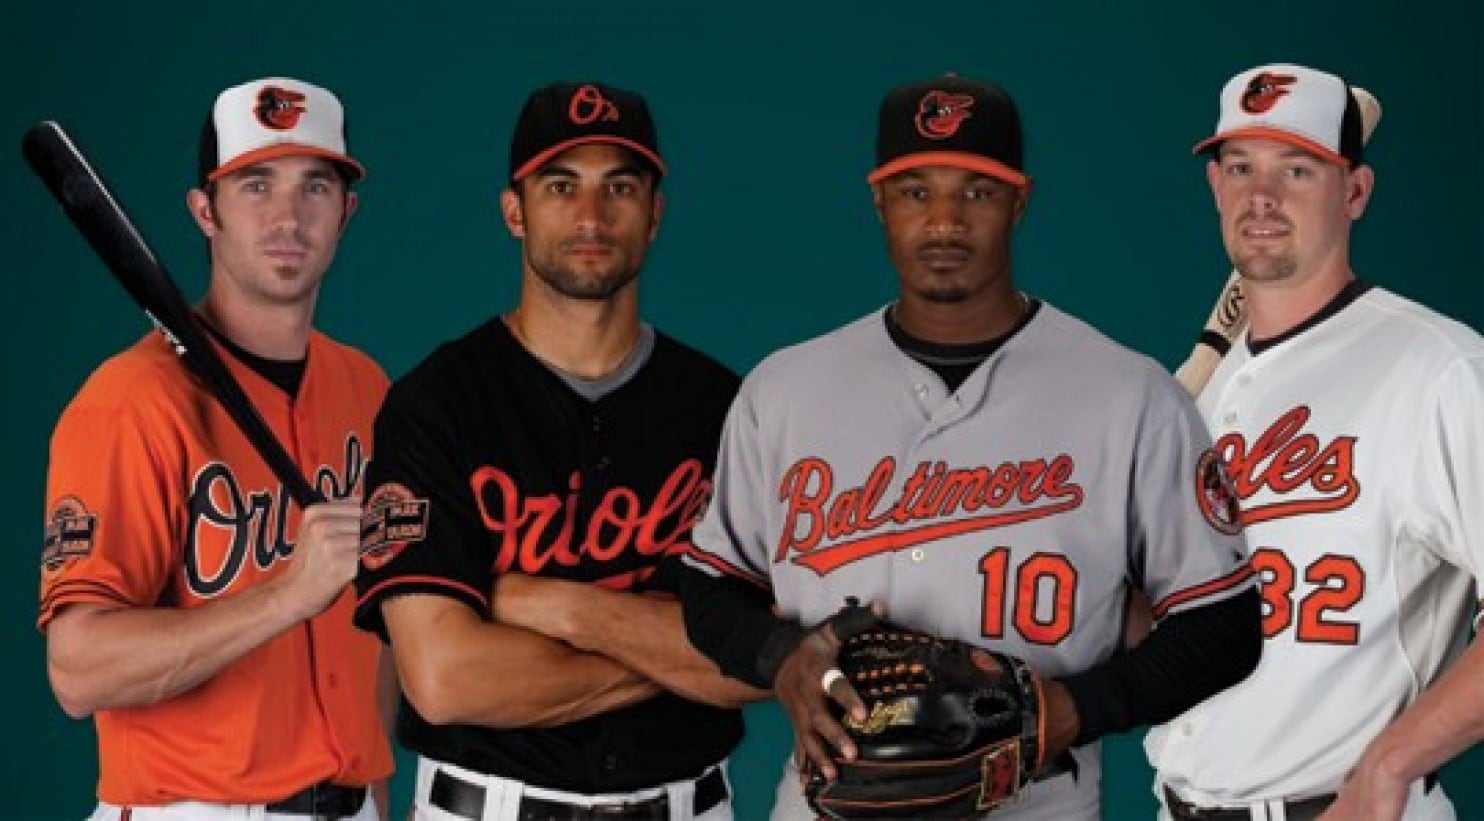 Why do the Orioles have Braille on their uniforms?